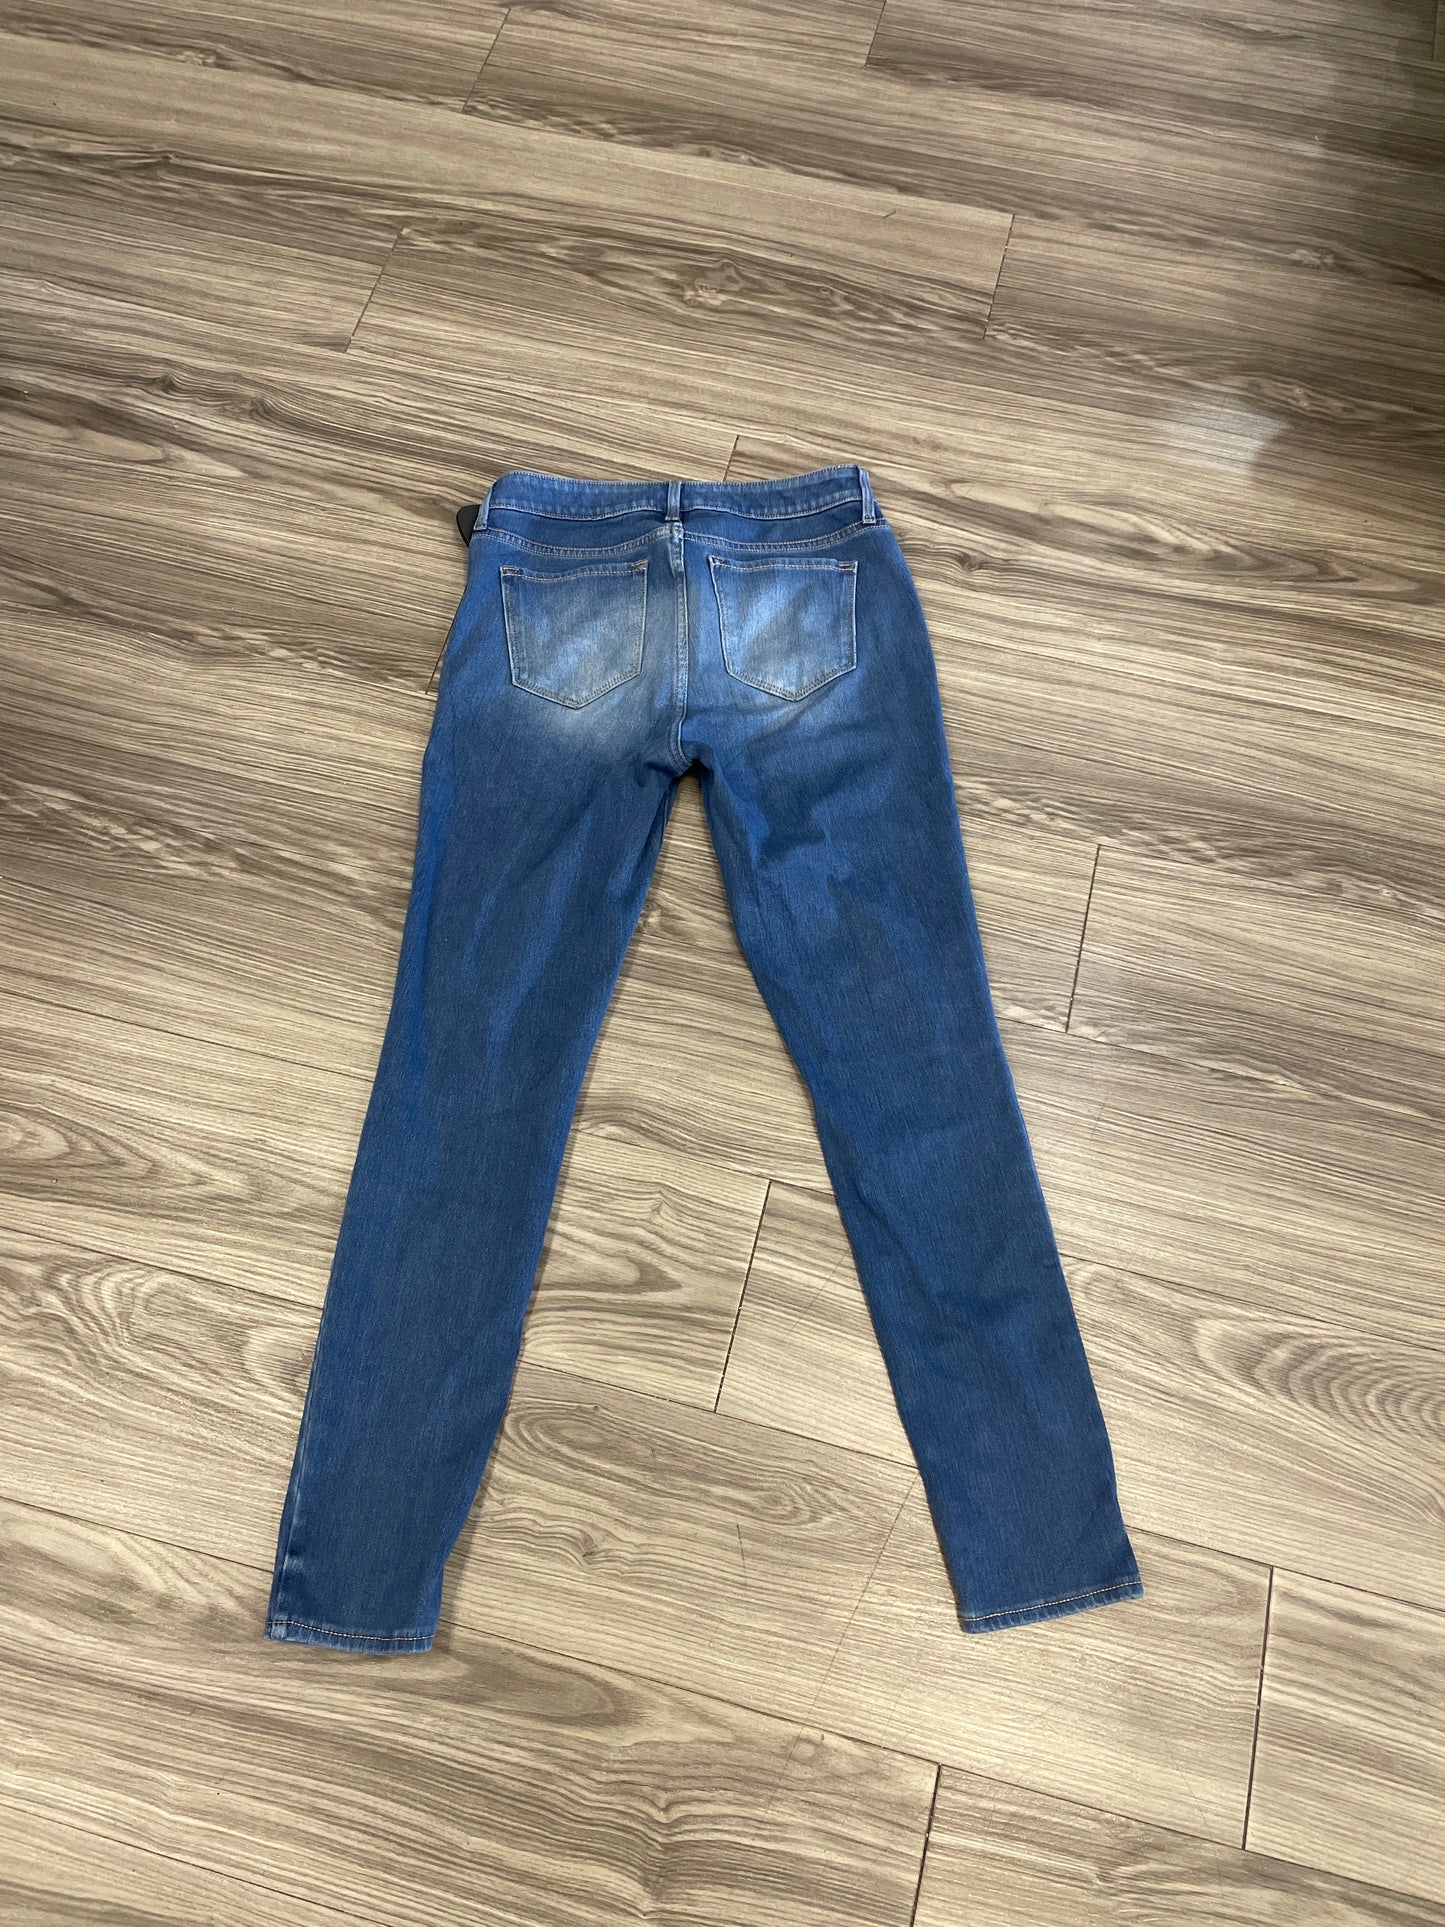 Maternity Jeans By Old Navy  Size: 2